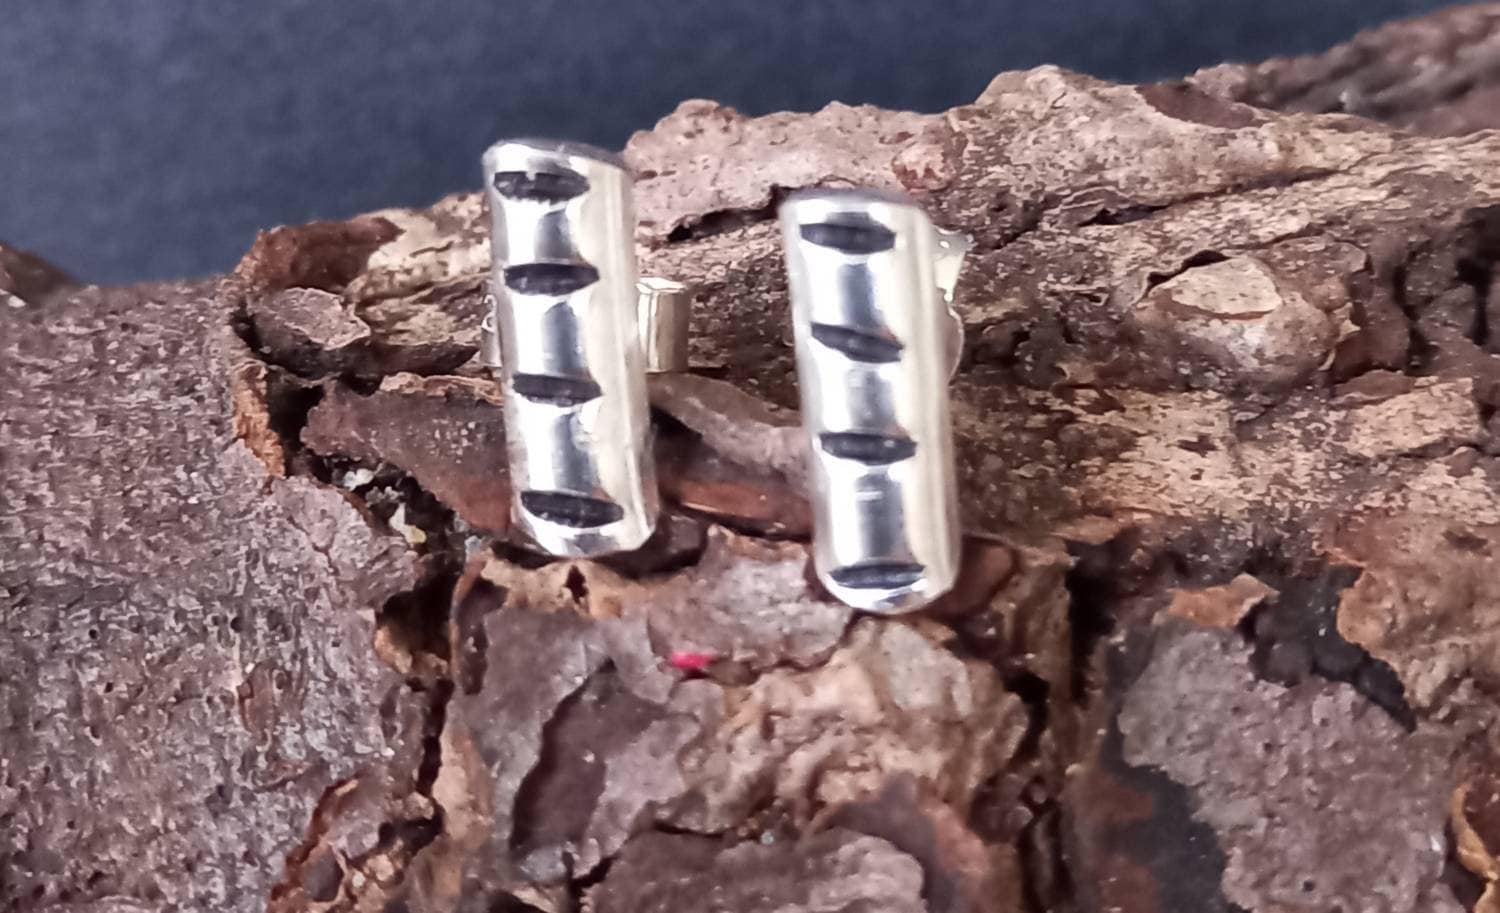 Silver Patterned Studs, Silver Bar Handmade in The Uk, Postal Gifts, Recycled